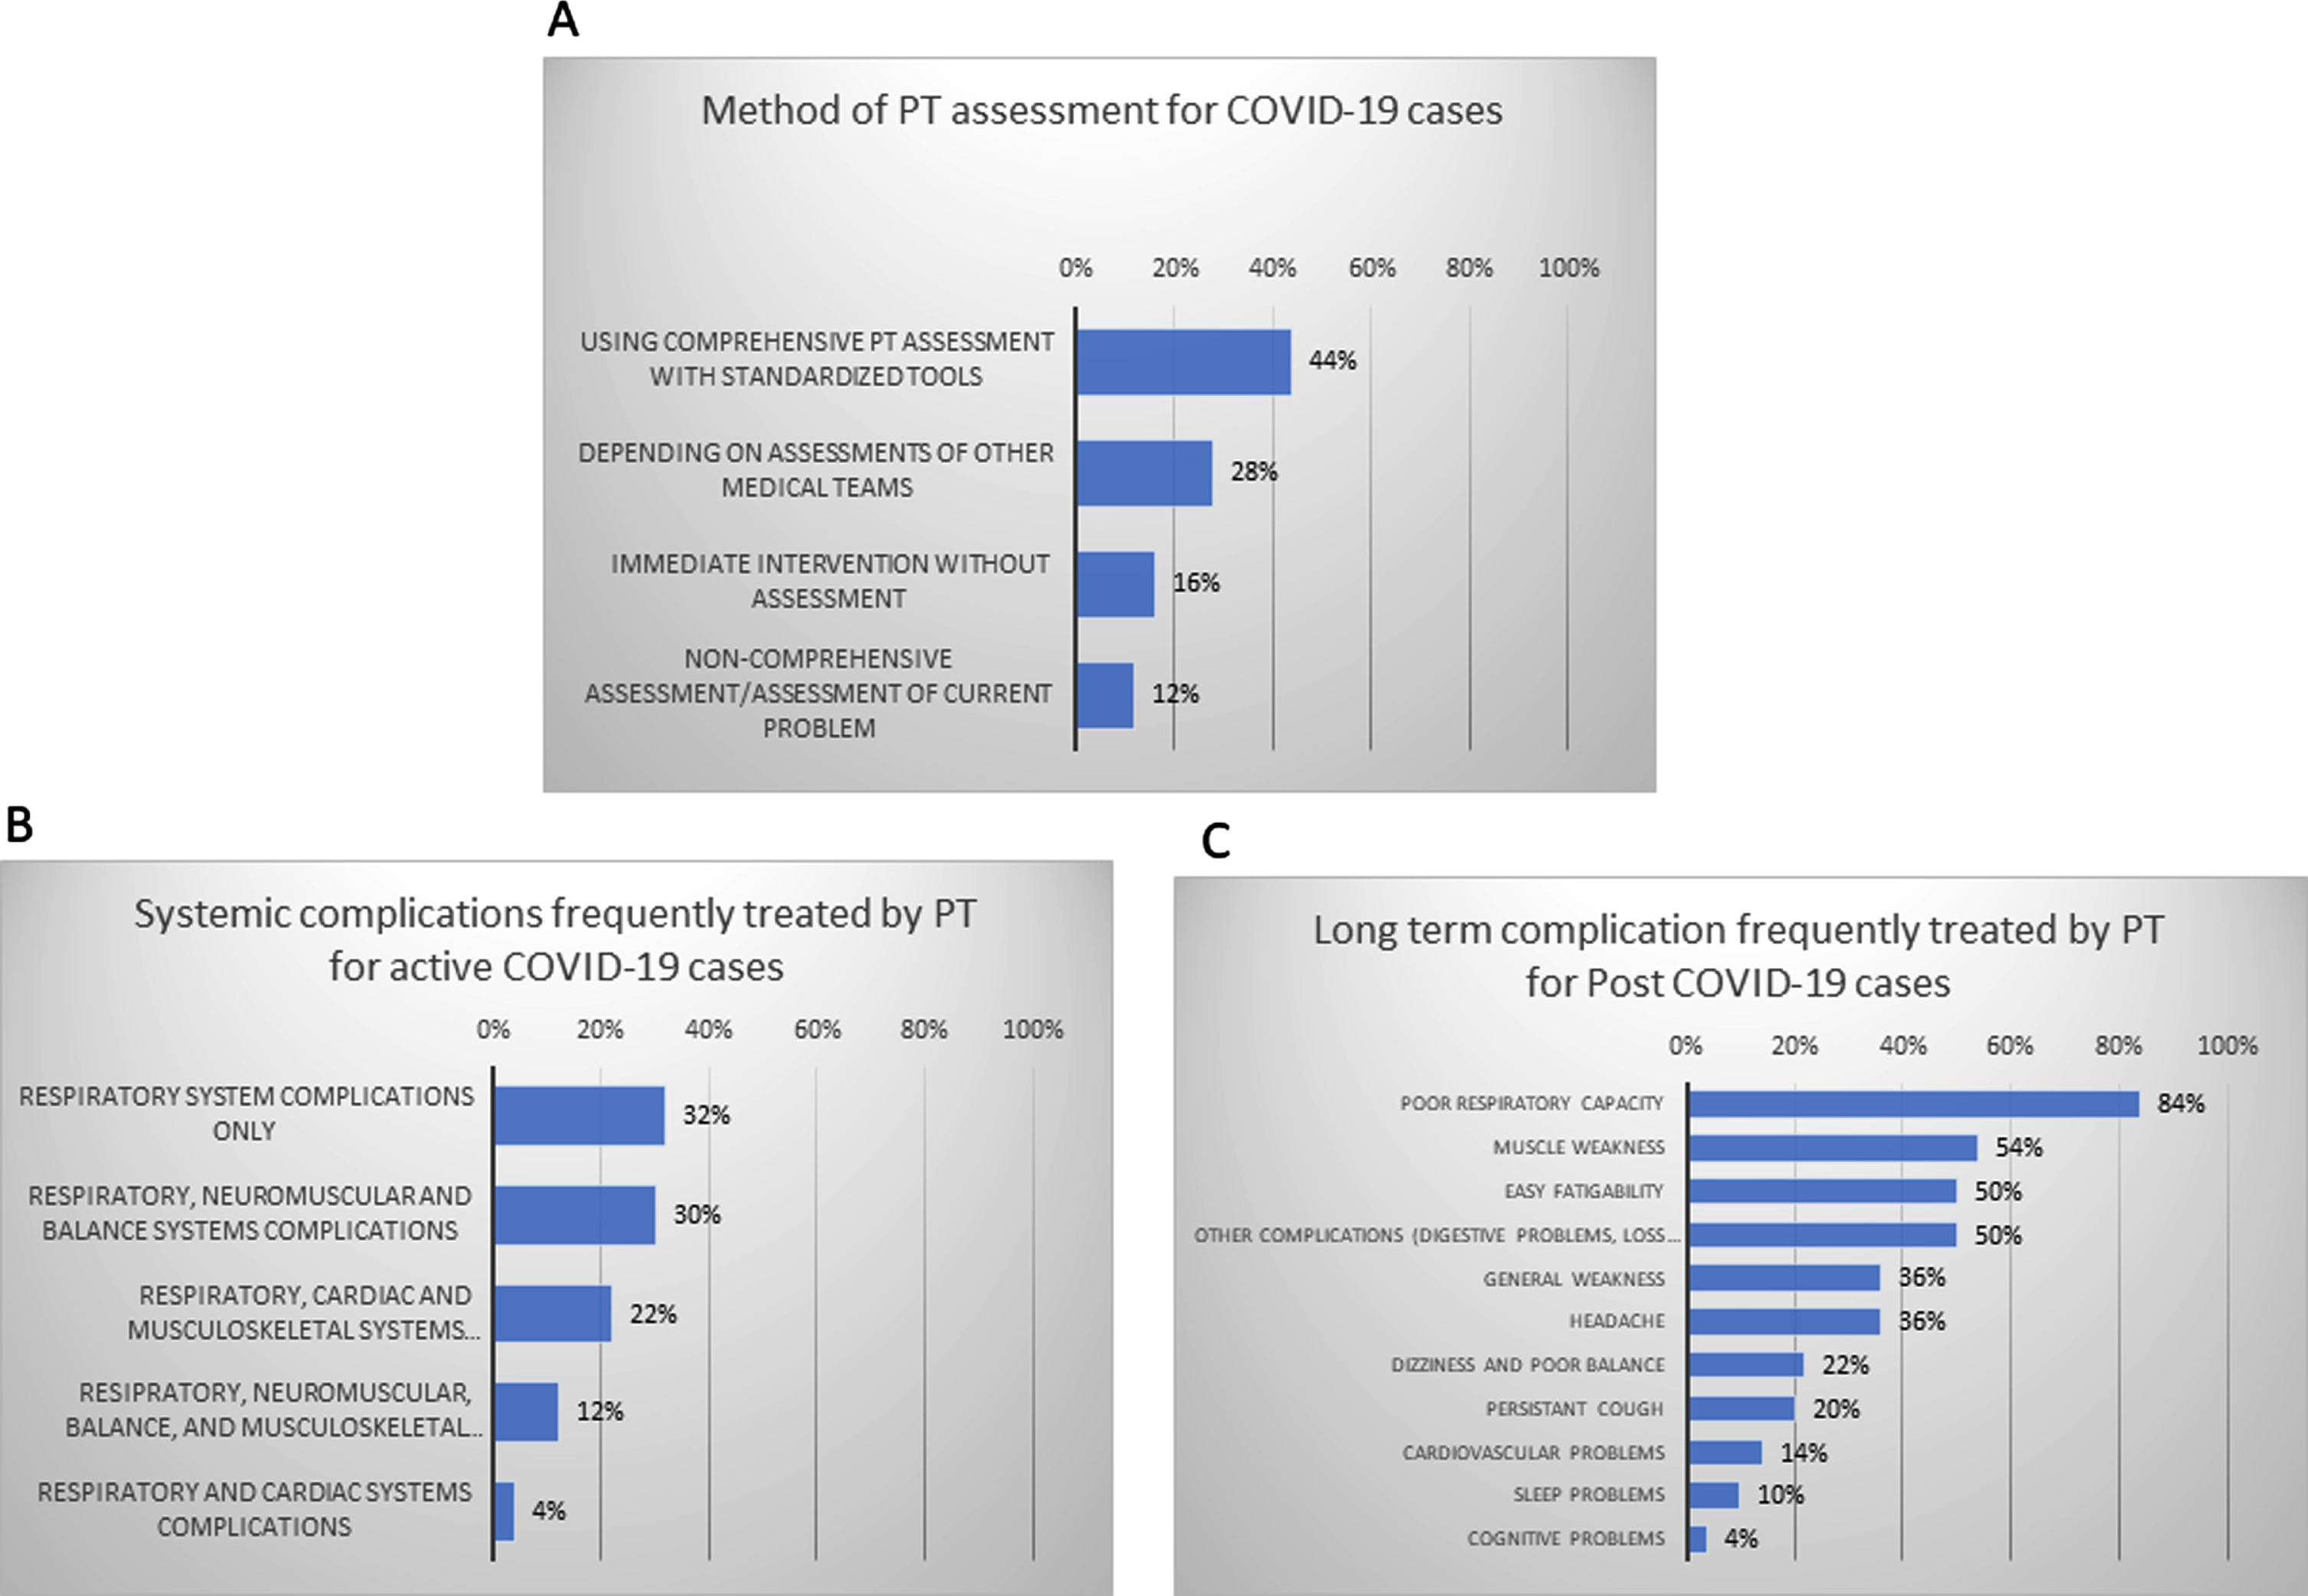 Method of physiotherapy assessment used by participants for their COVID-19 cases (A). The percentages of systemic complications for active COVID-19 cases (B), and long-term complications for post-COVID-19 cases (C).